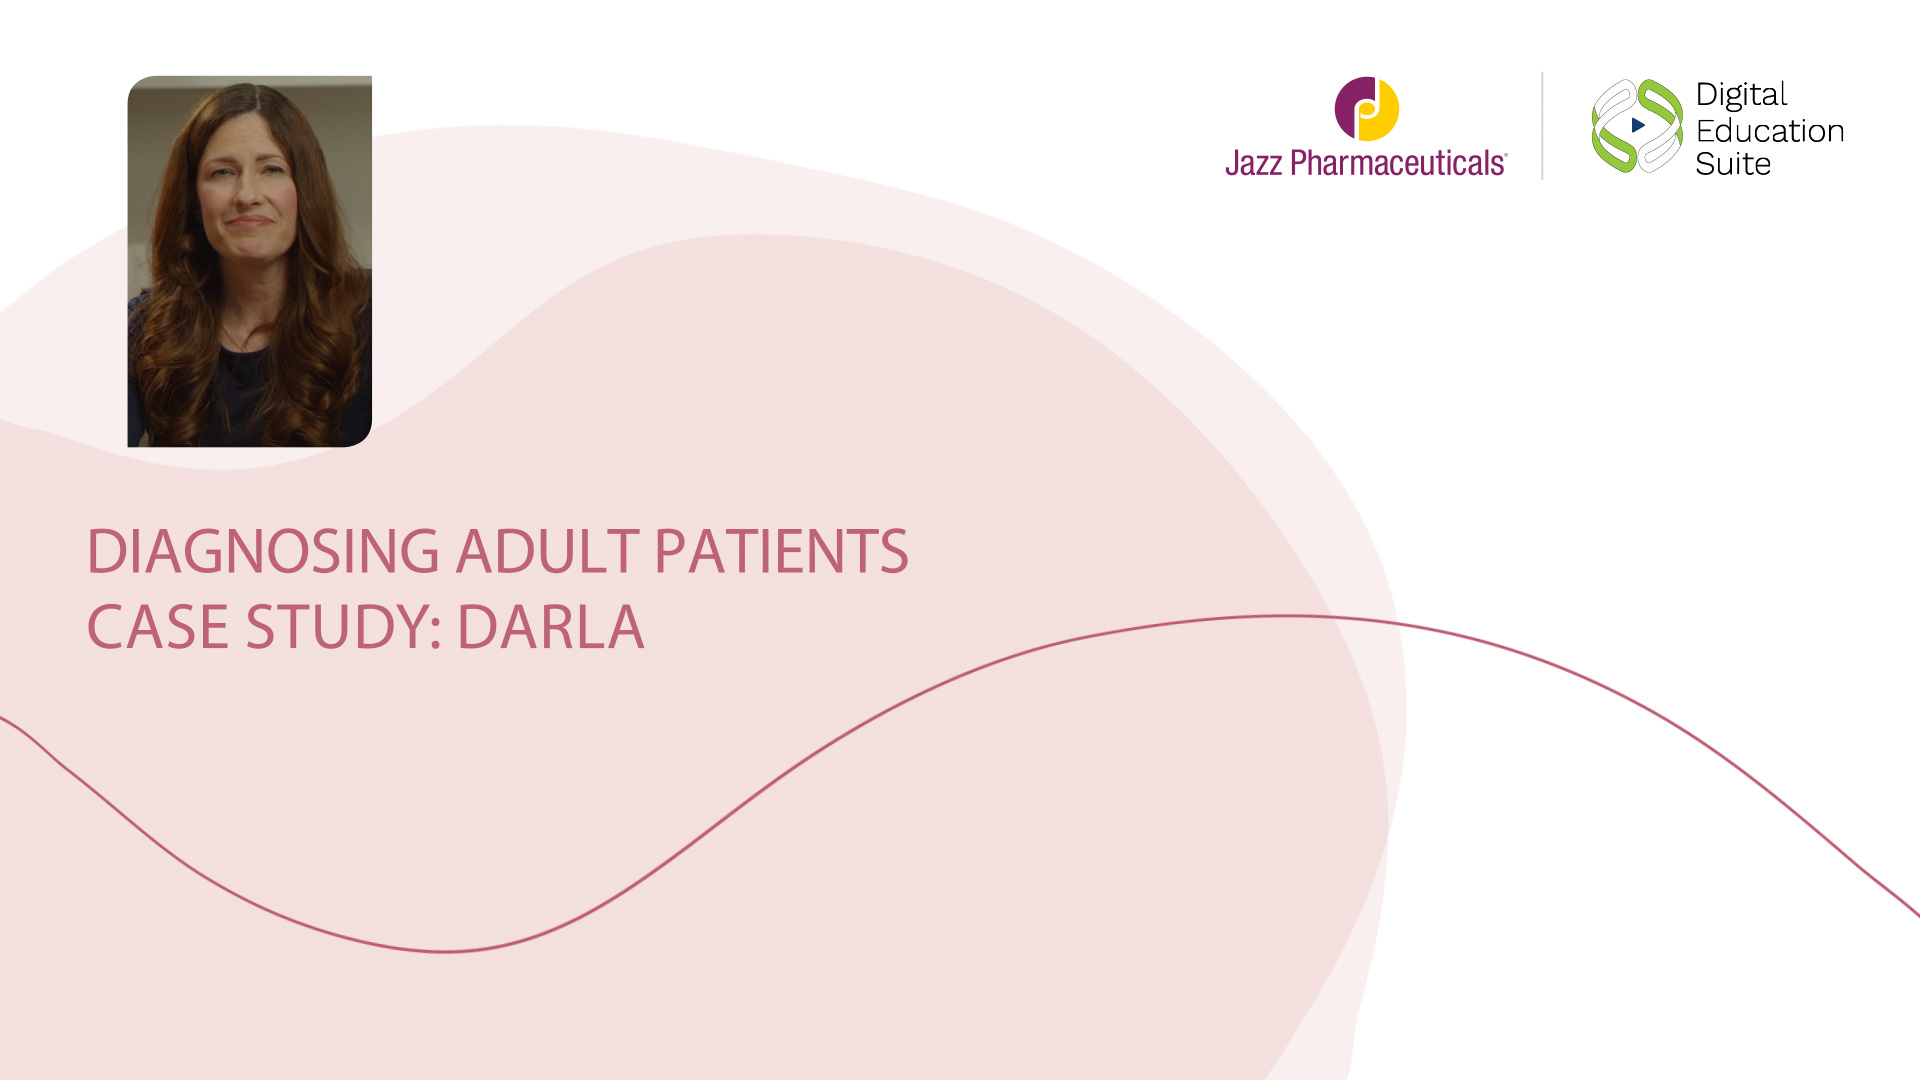 A case study of a hypothetical patient with Dravet who has been transferred to your care.